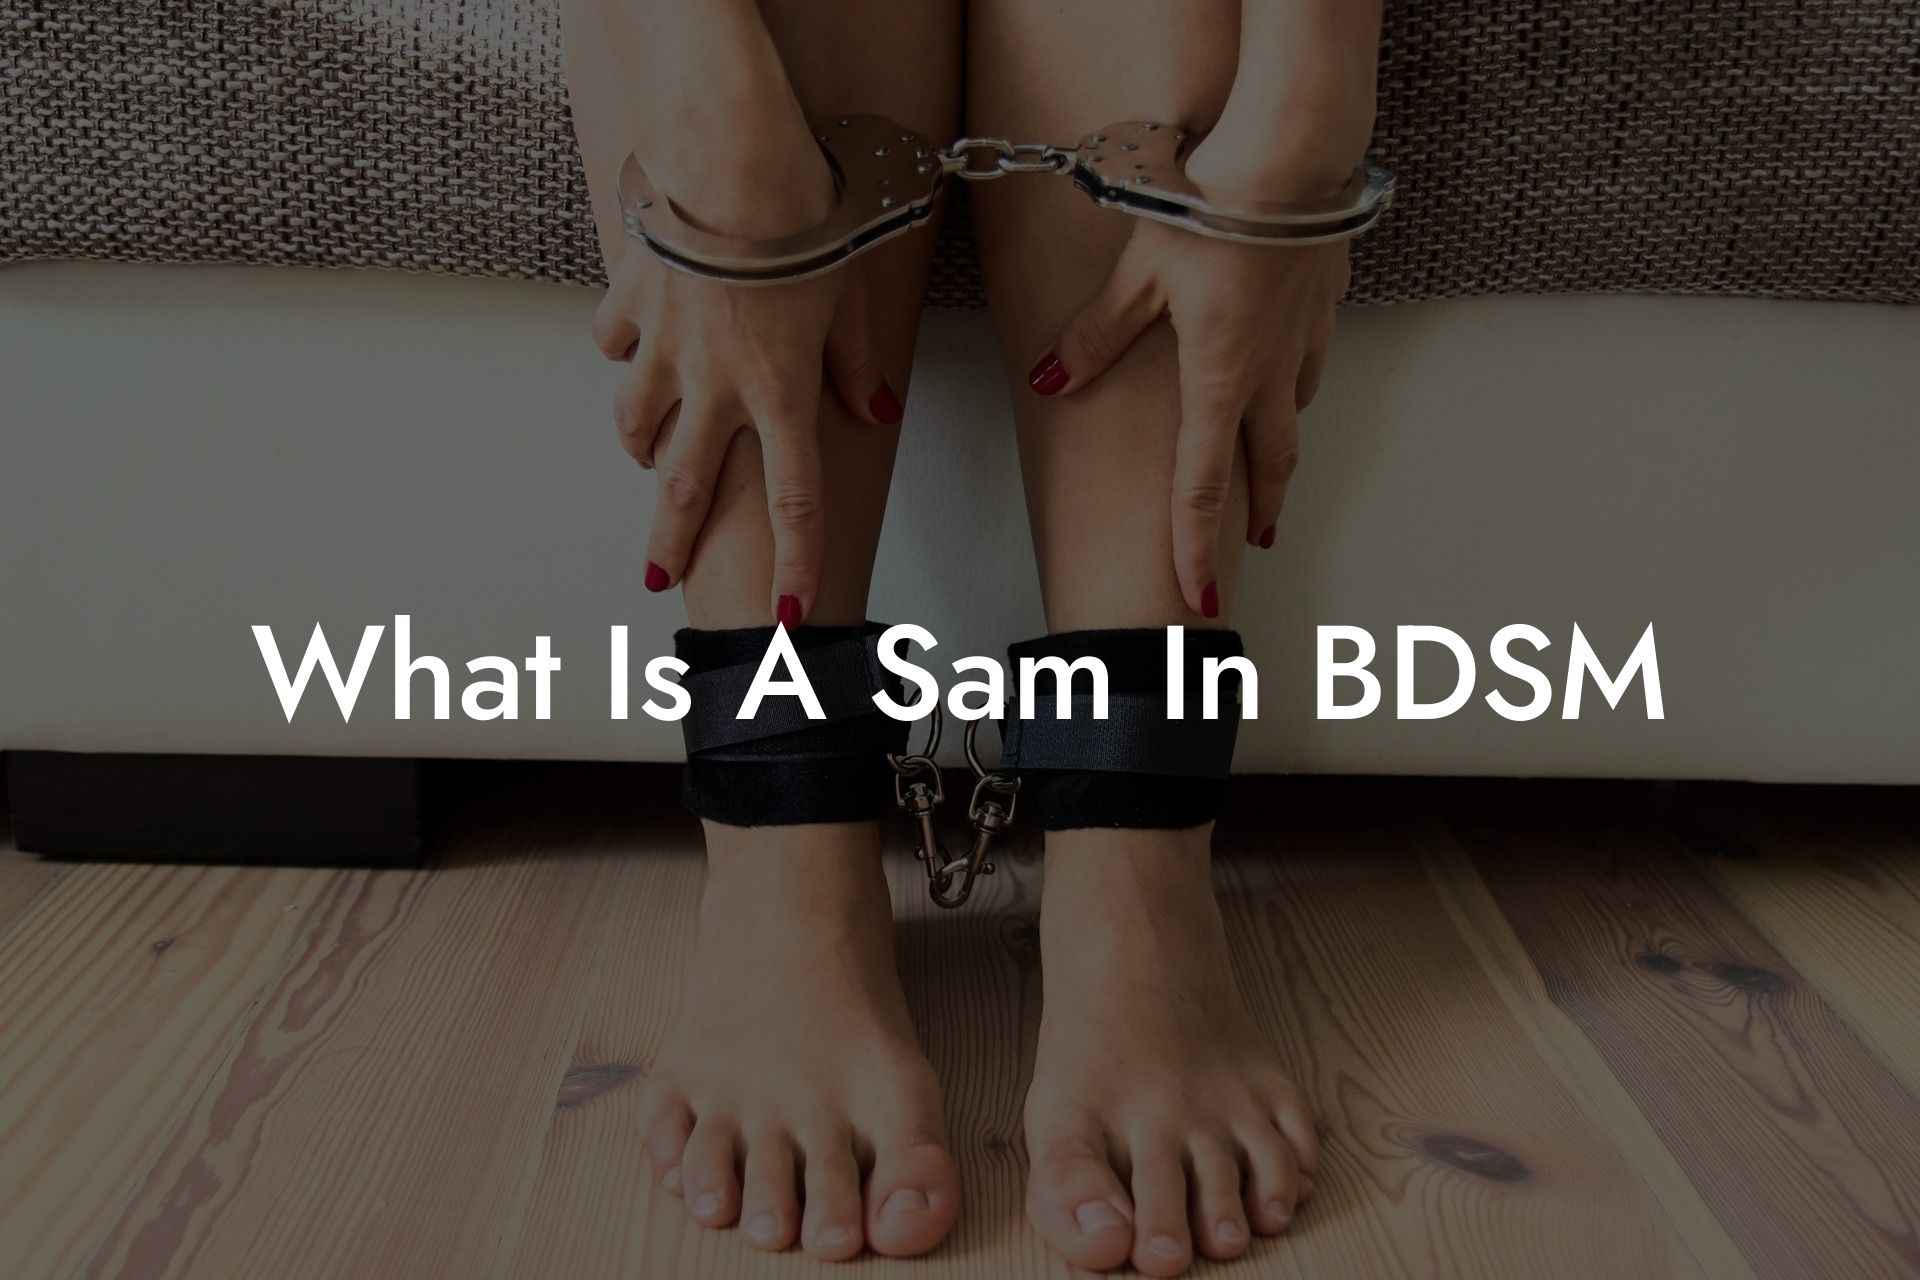 What Is A Sam In BDSM